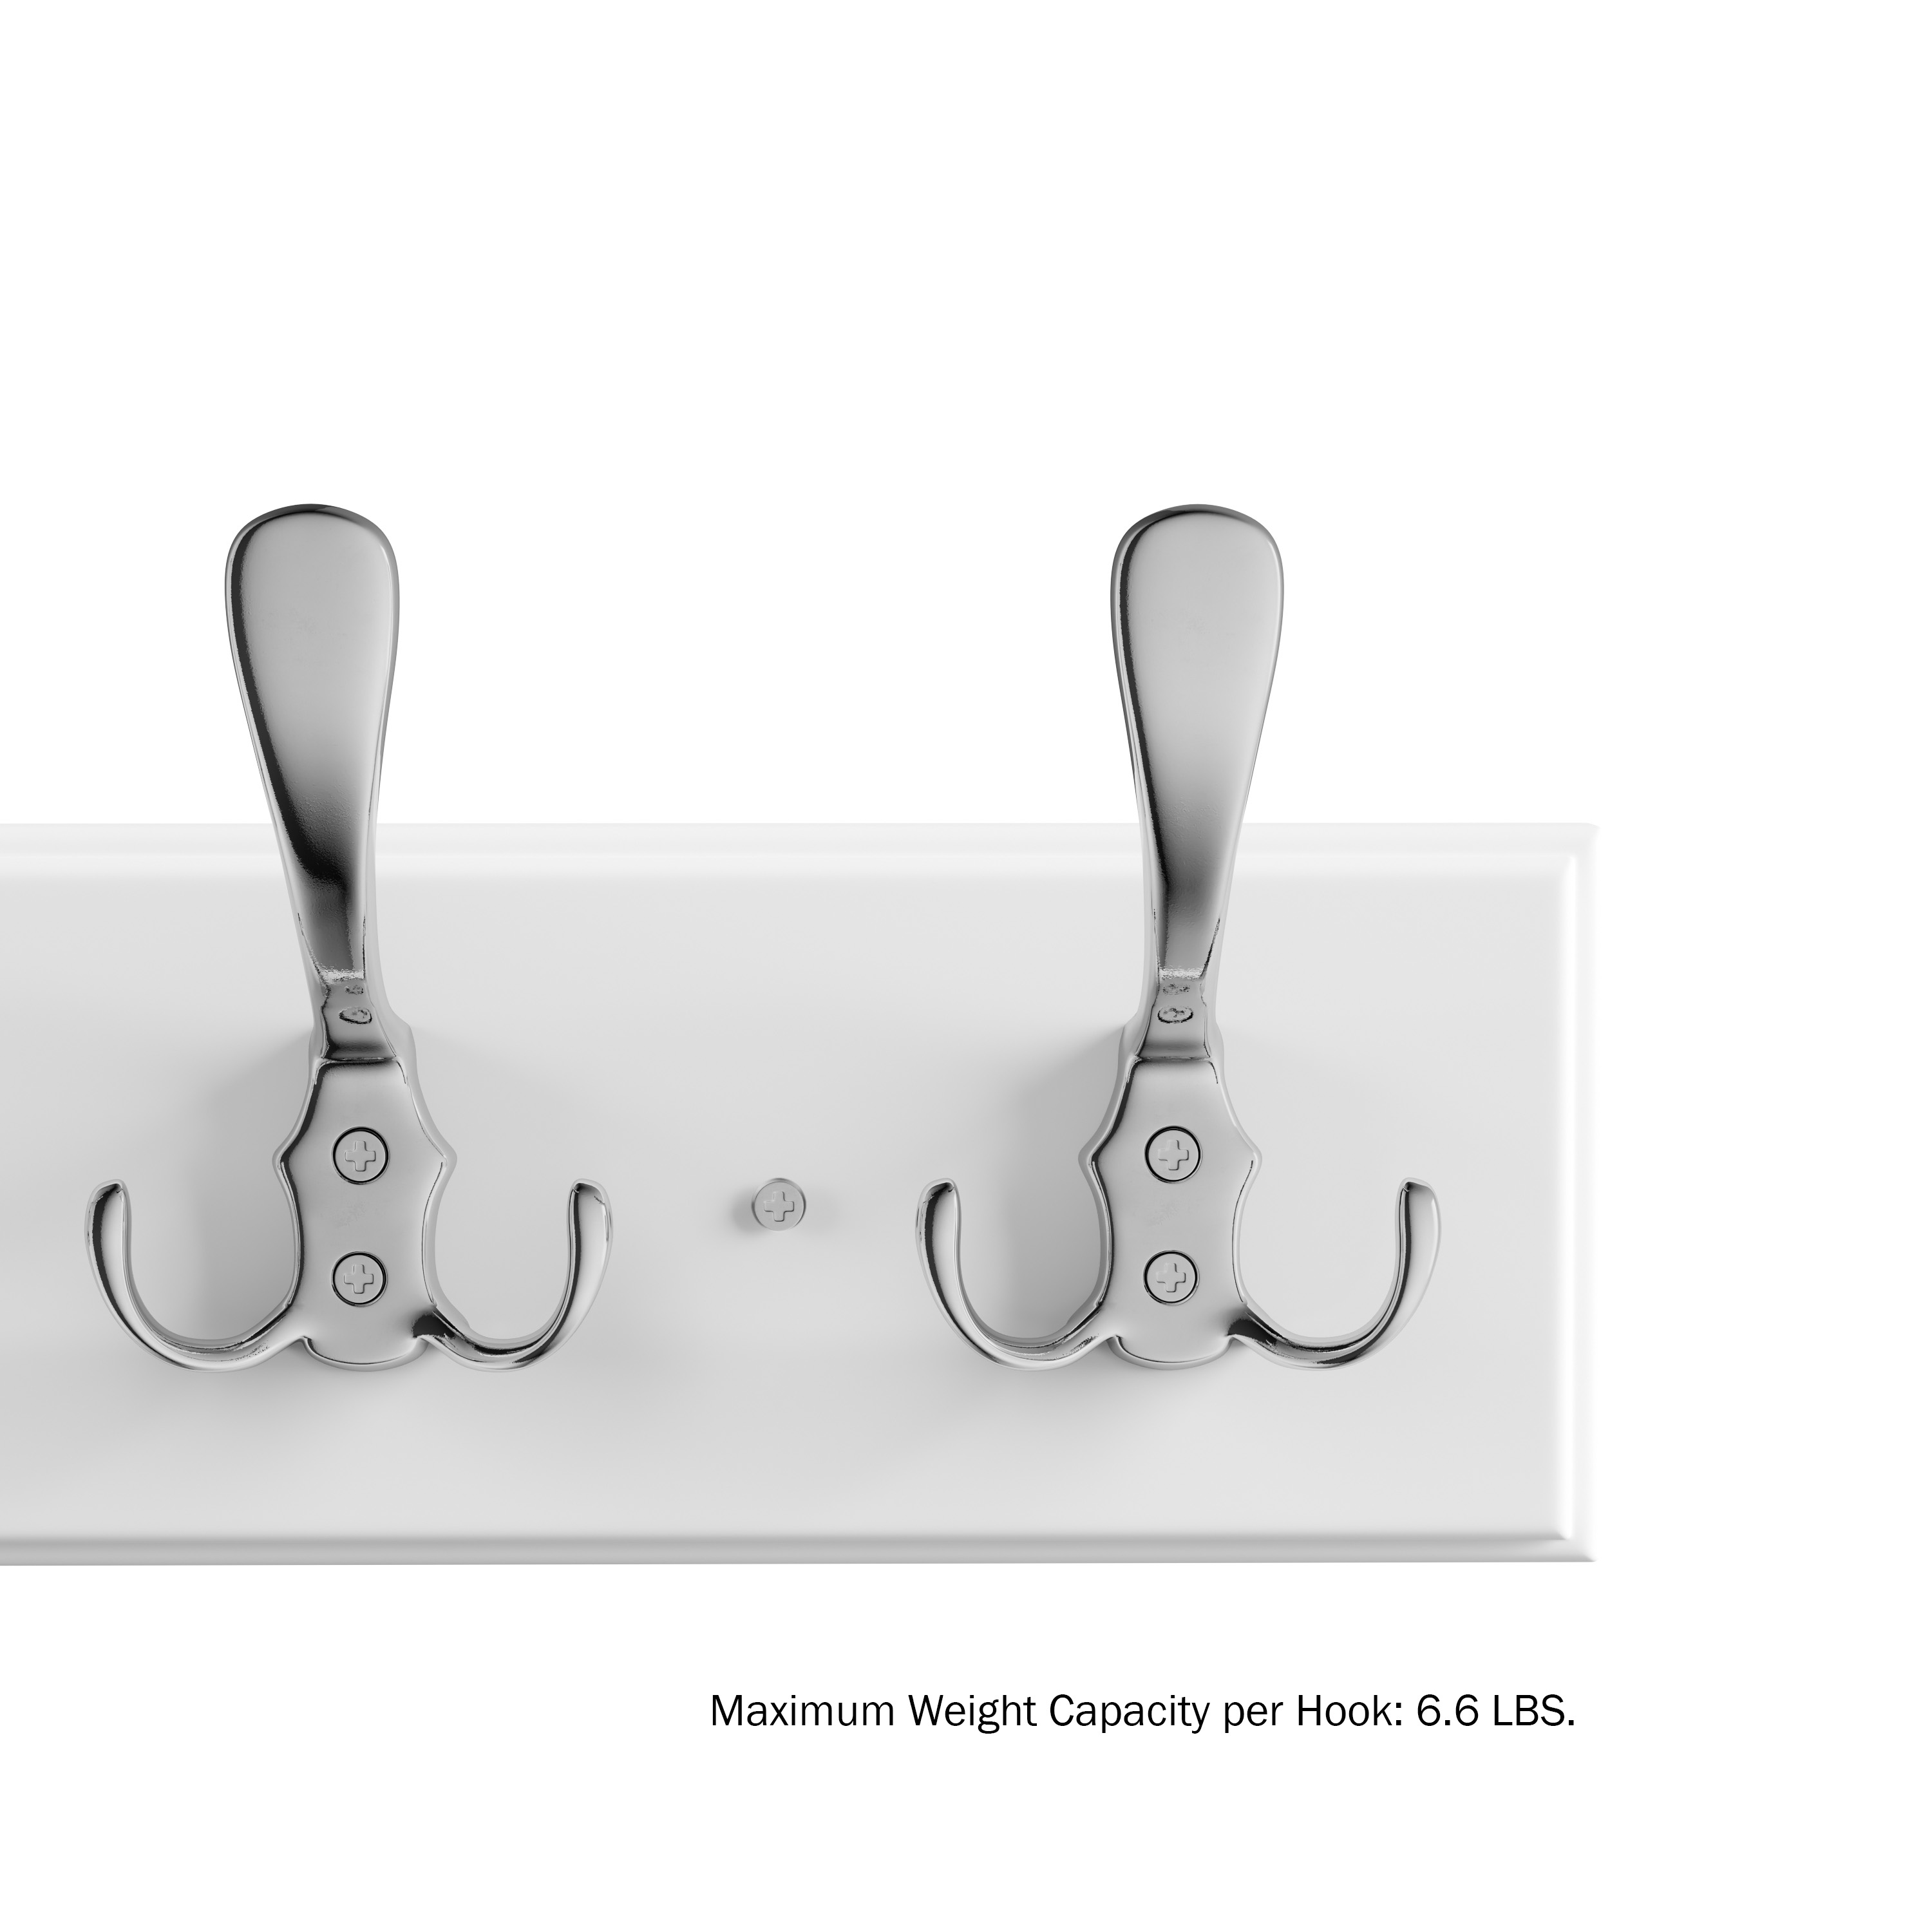 Wall Hook Rail-Mounted Hanging Rack With 6 Hooks-Entryway, Hallway, Or Bedroom-Storage Organization For Coats, Towels, Bags By Lavish Home (White) - image 3 of 7